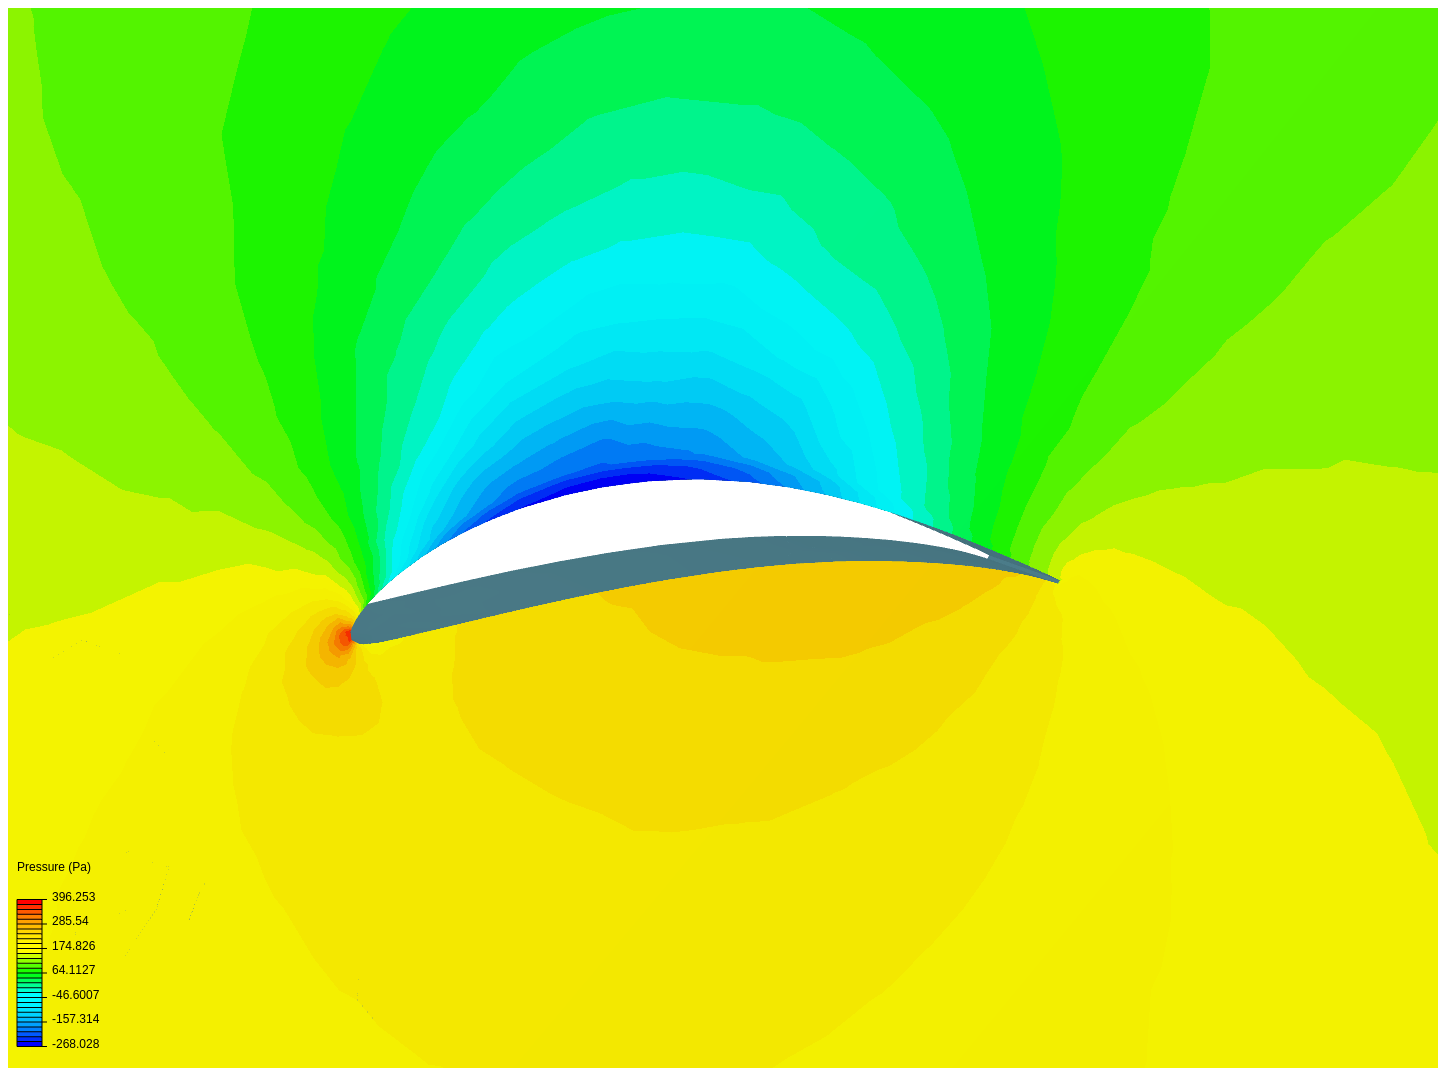 airfoil1 image